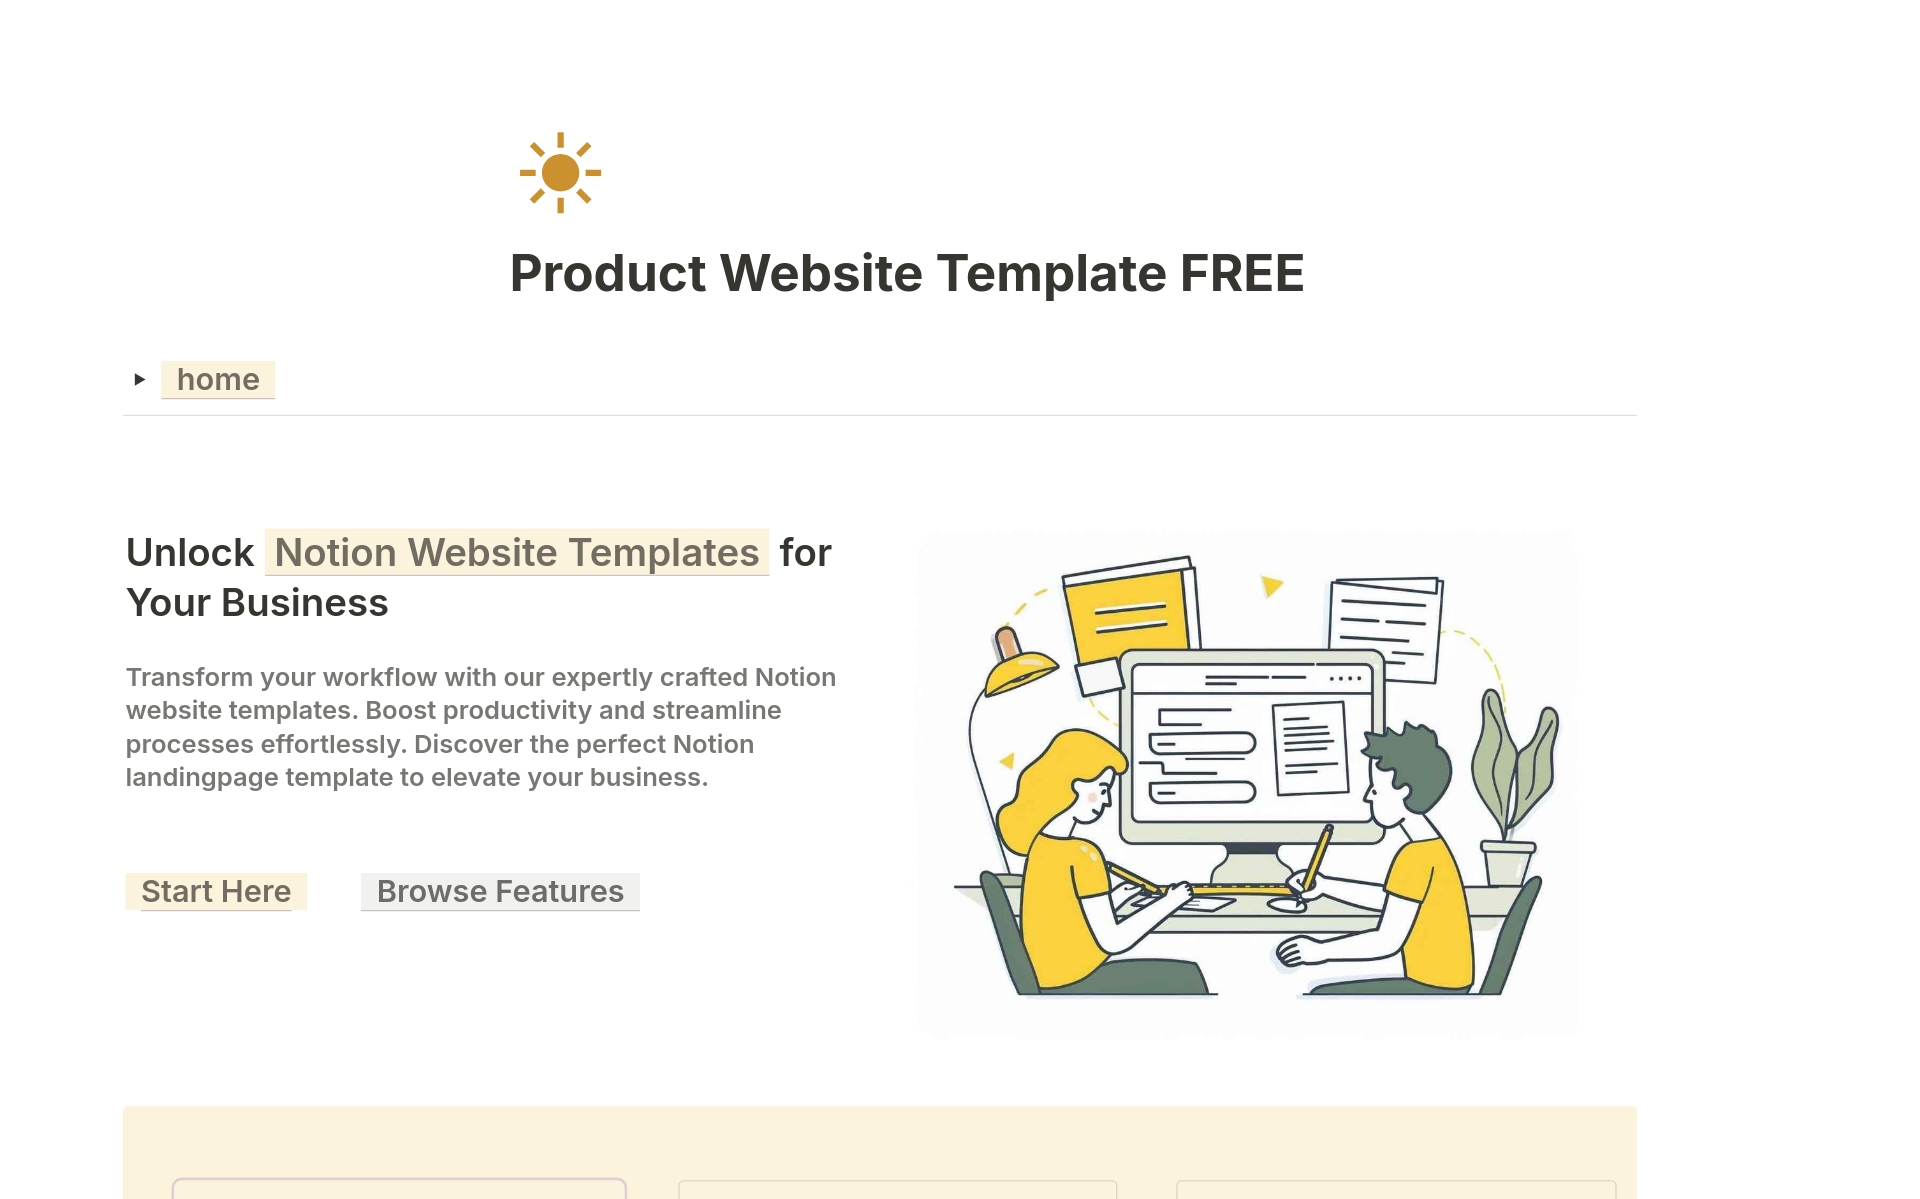 A template preview for Product Website